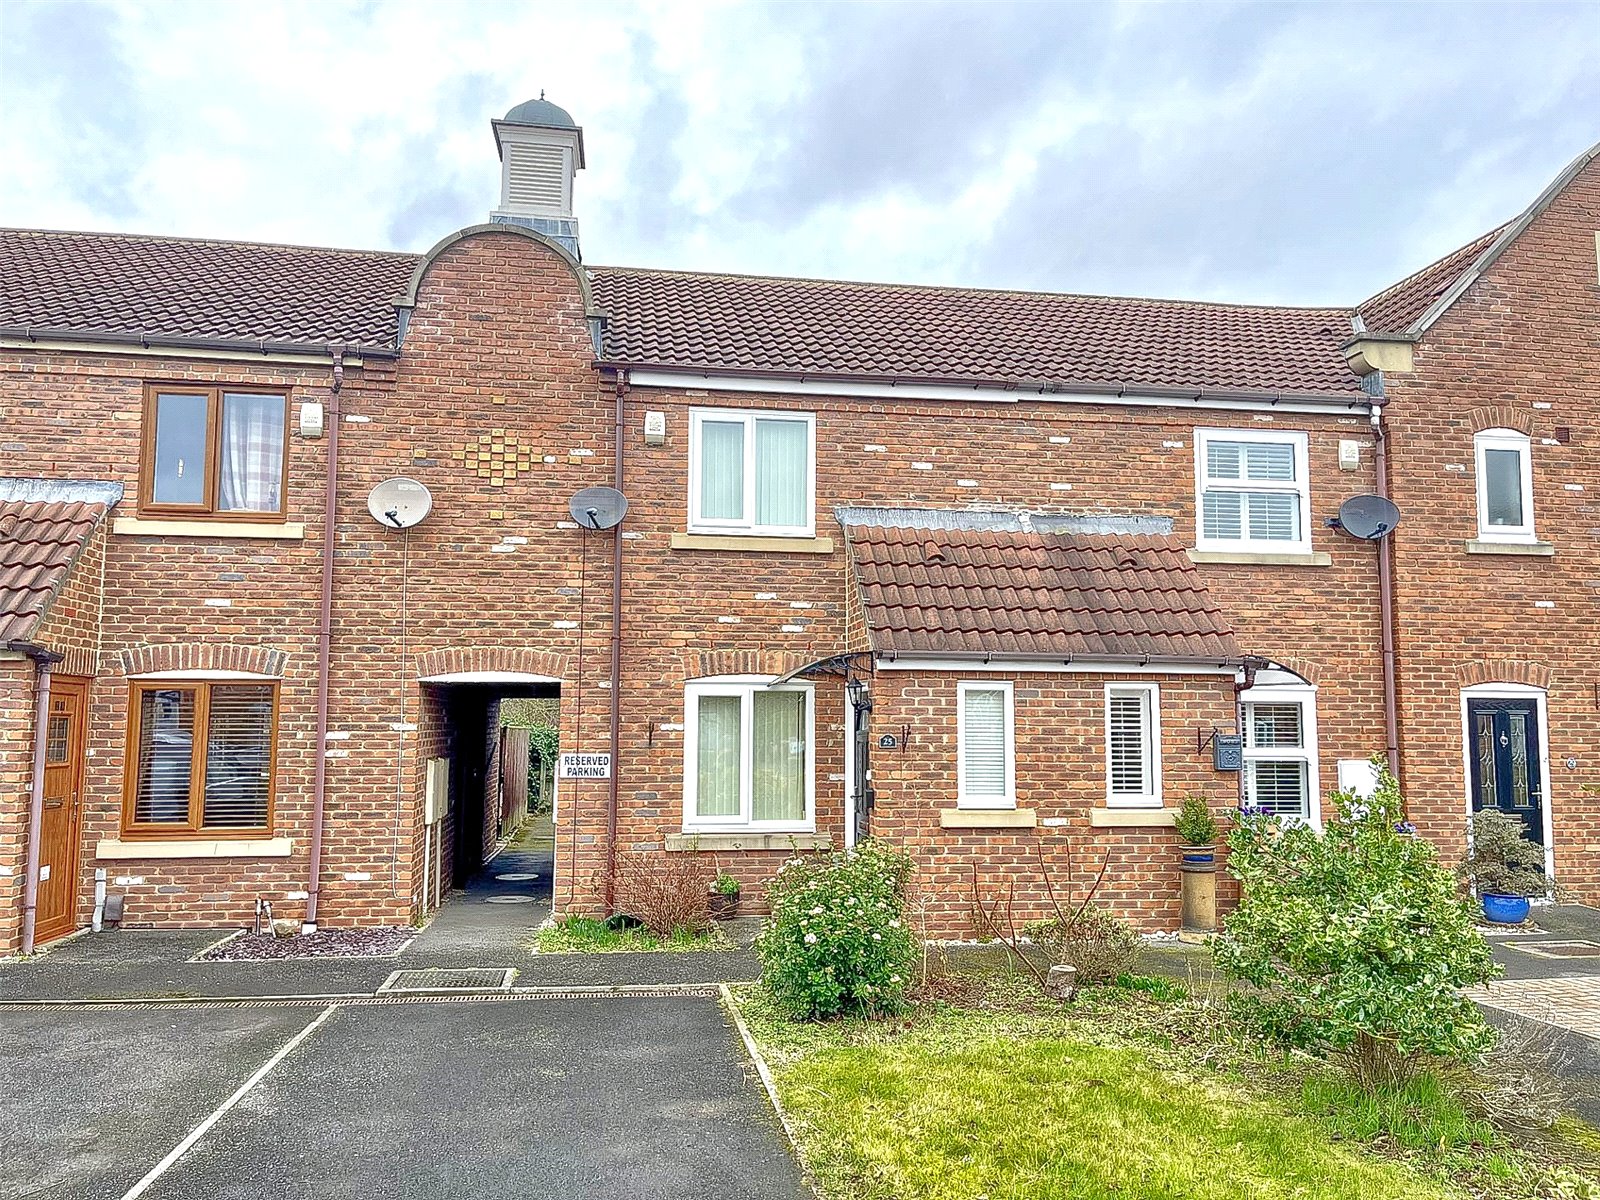 3 bed house for sale in Raydale Beck, Ingleby Barwick  - Property Image 1